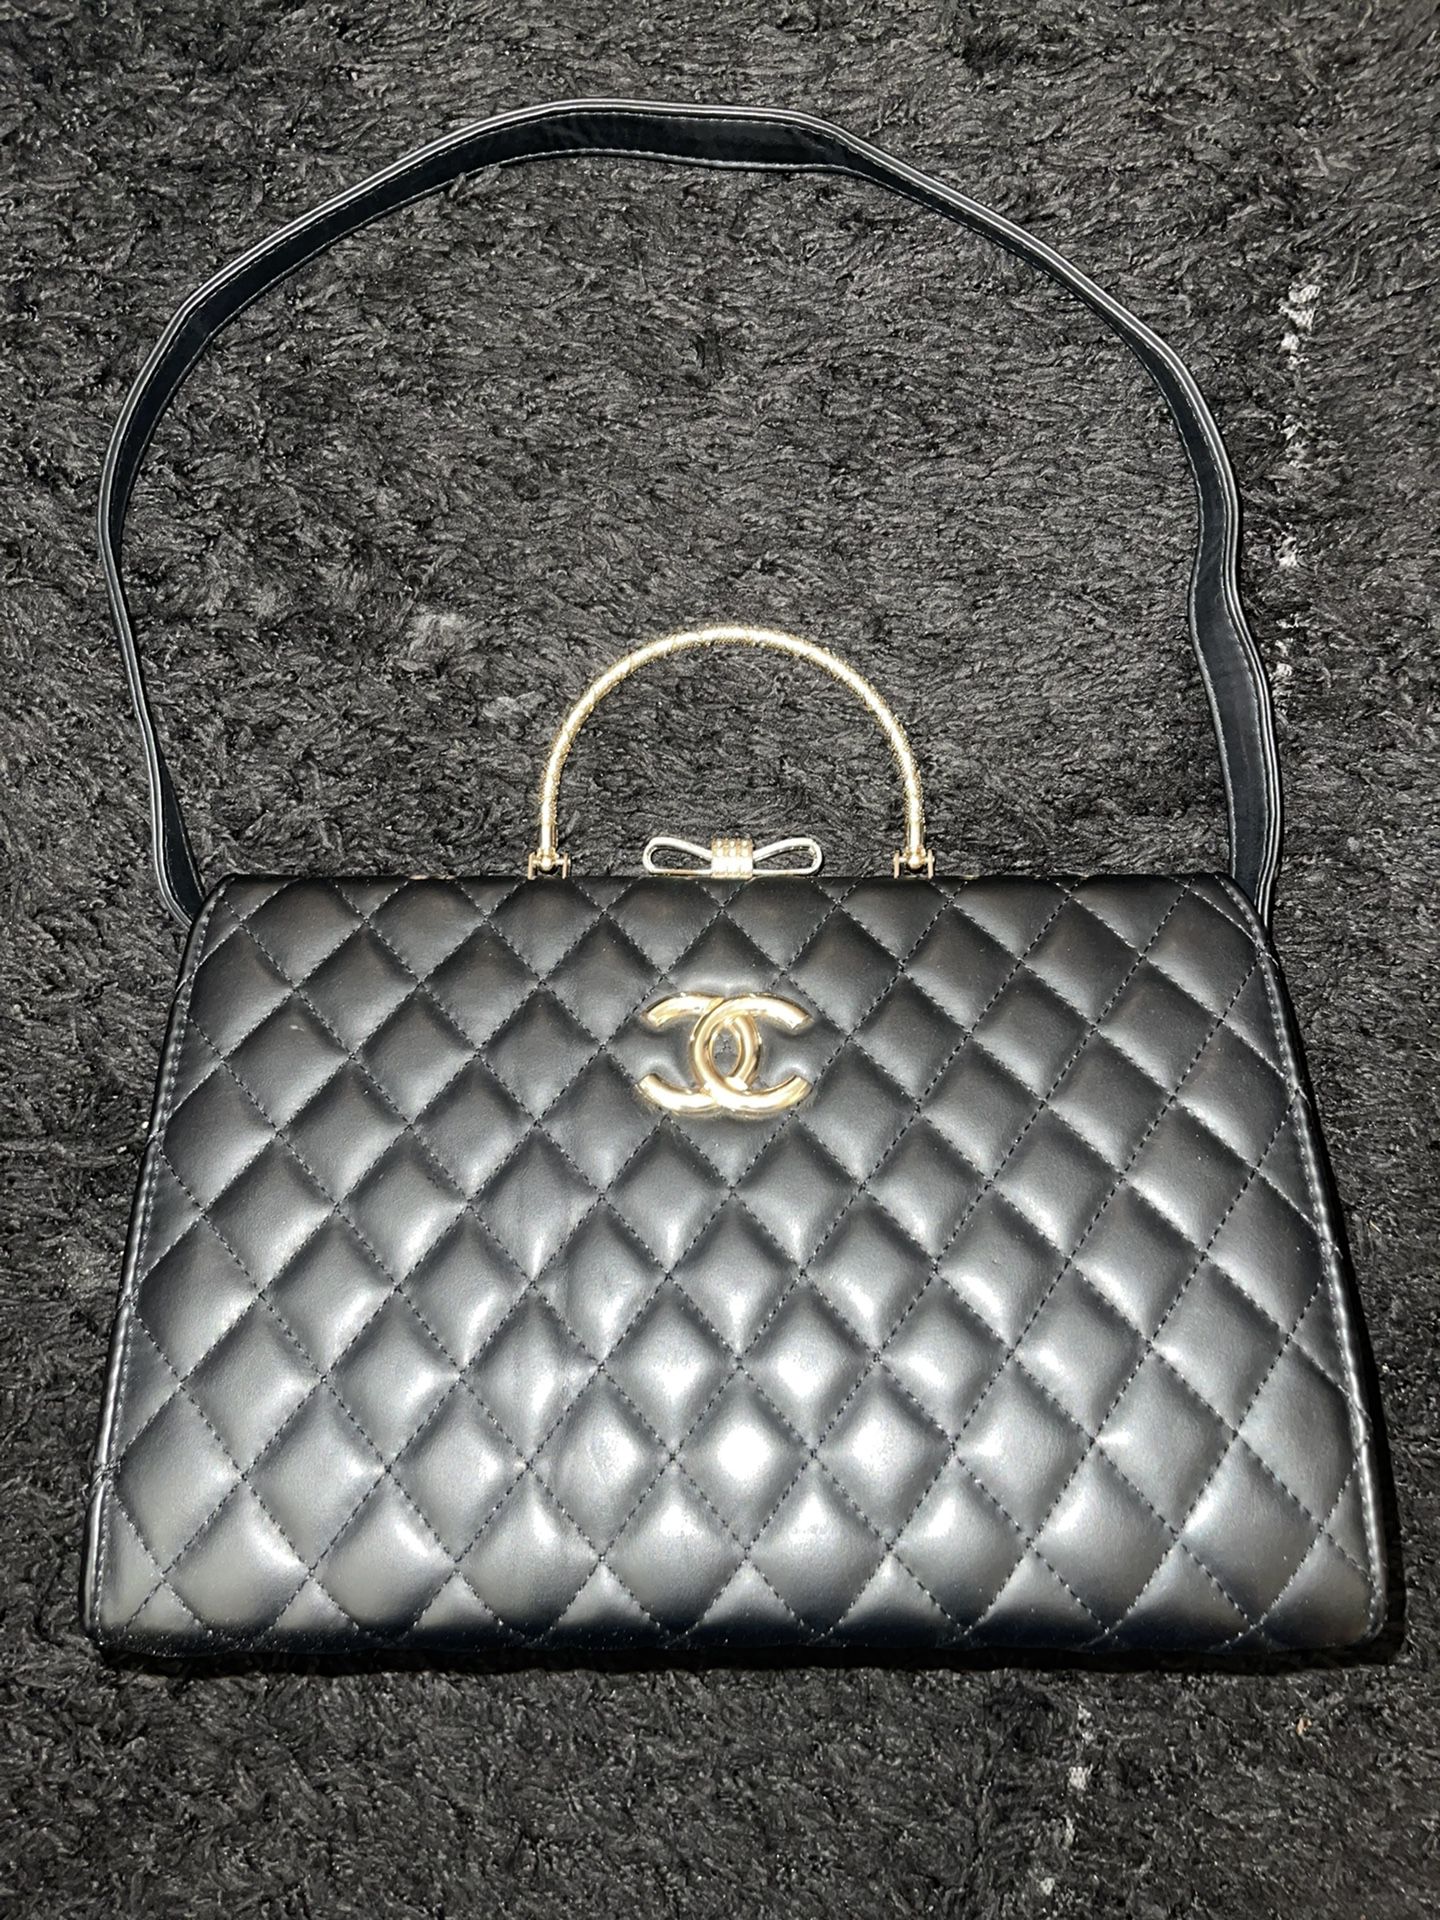 Chanel Quilted Hand Bag 